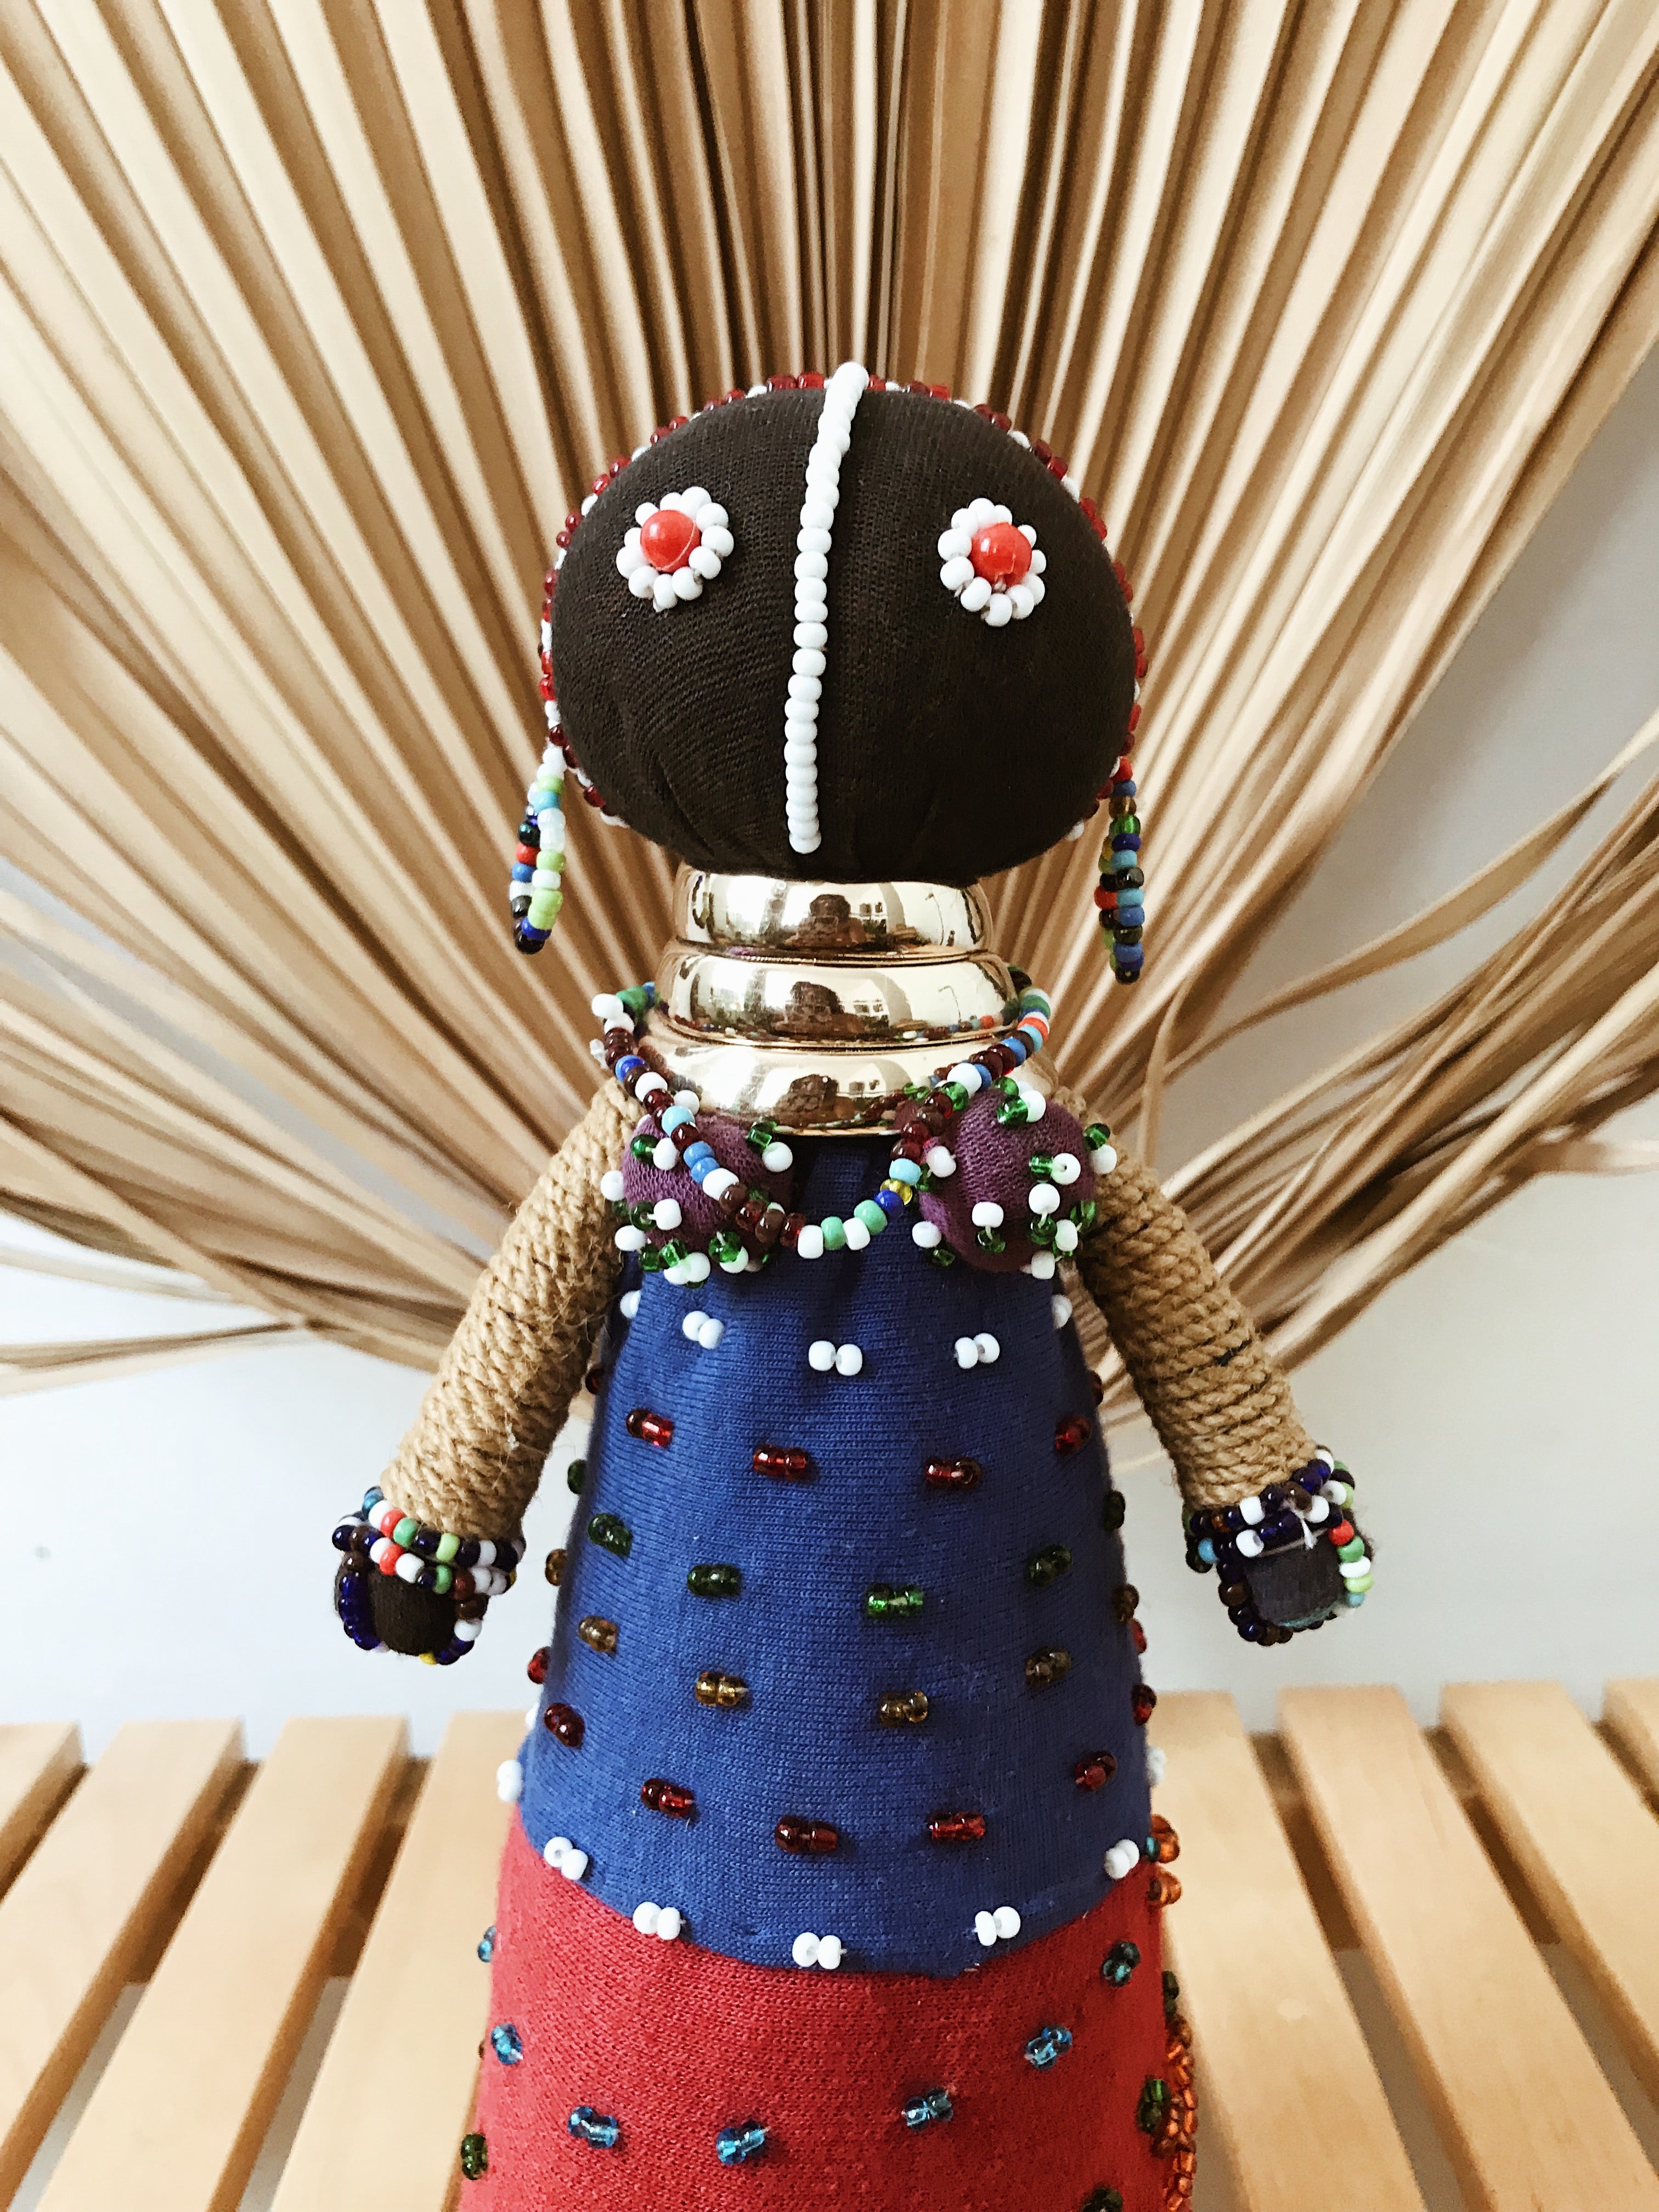 Ndebele Ceremonial Doll